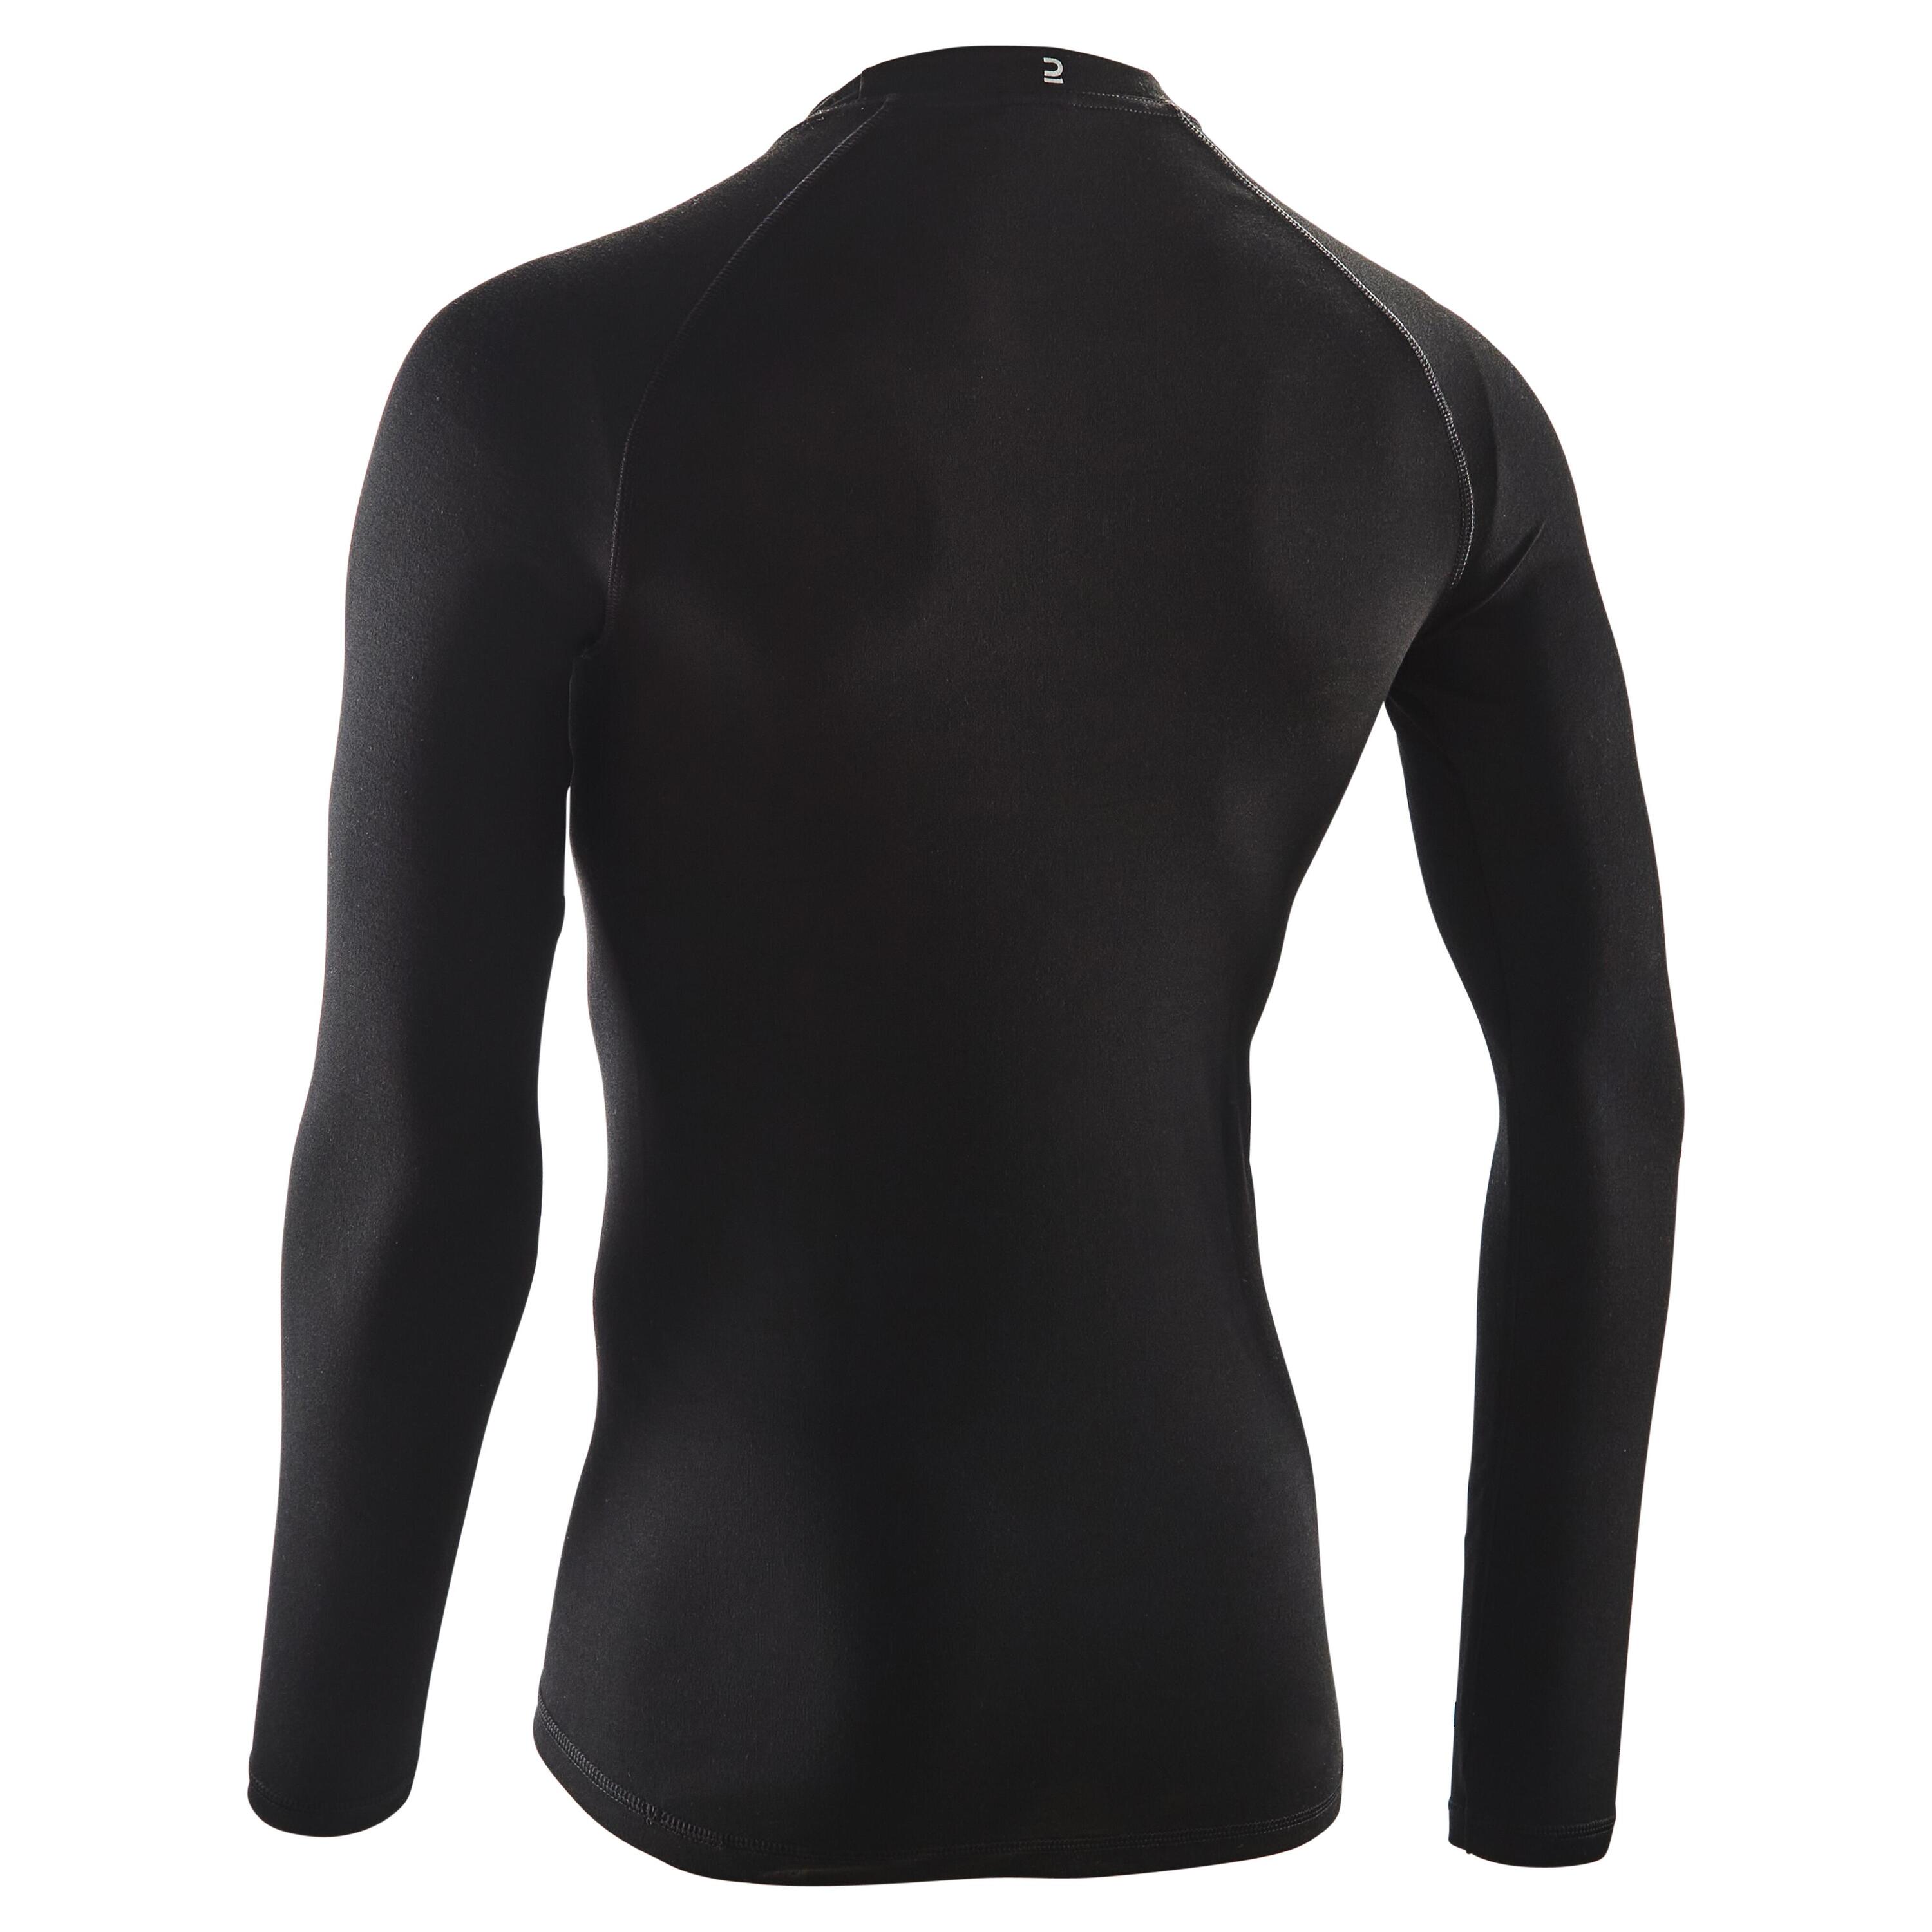 Essential Cycling Base Layer - Black 2/5